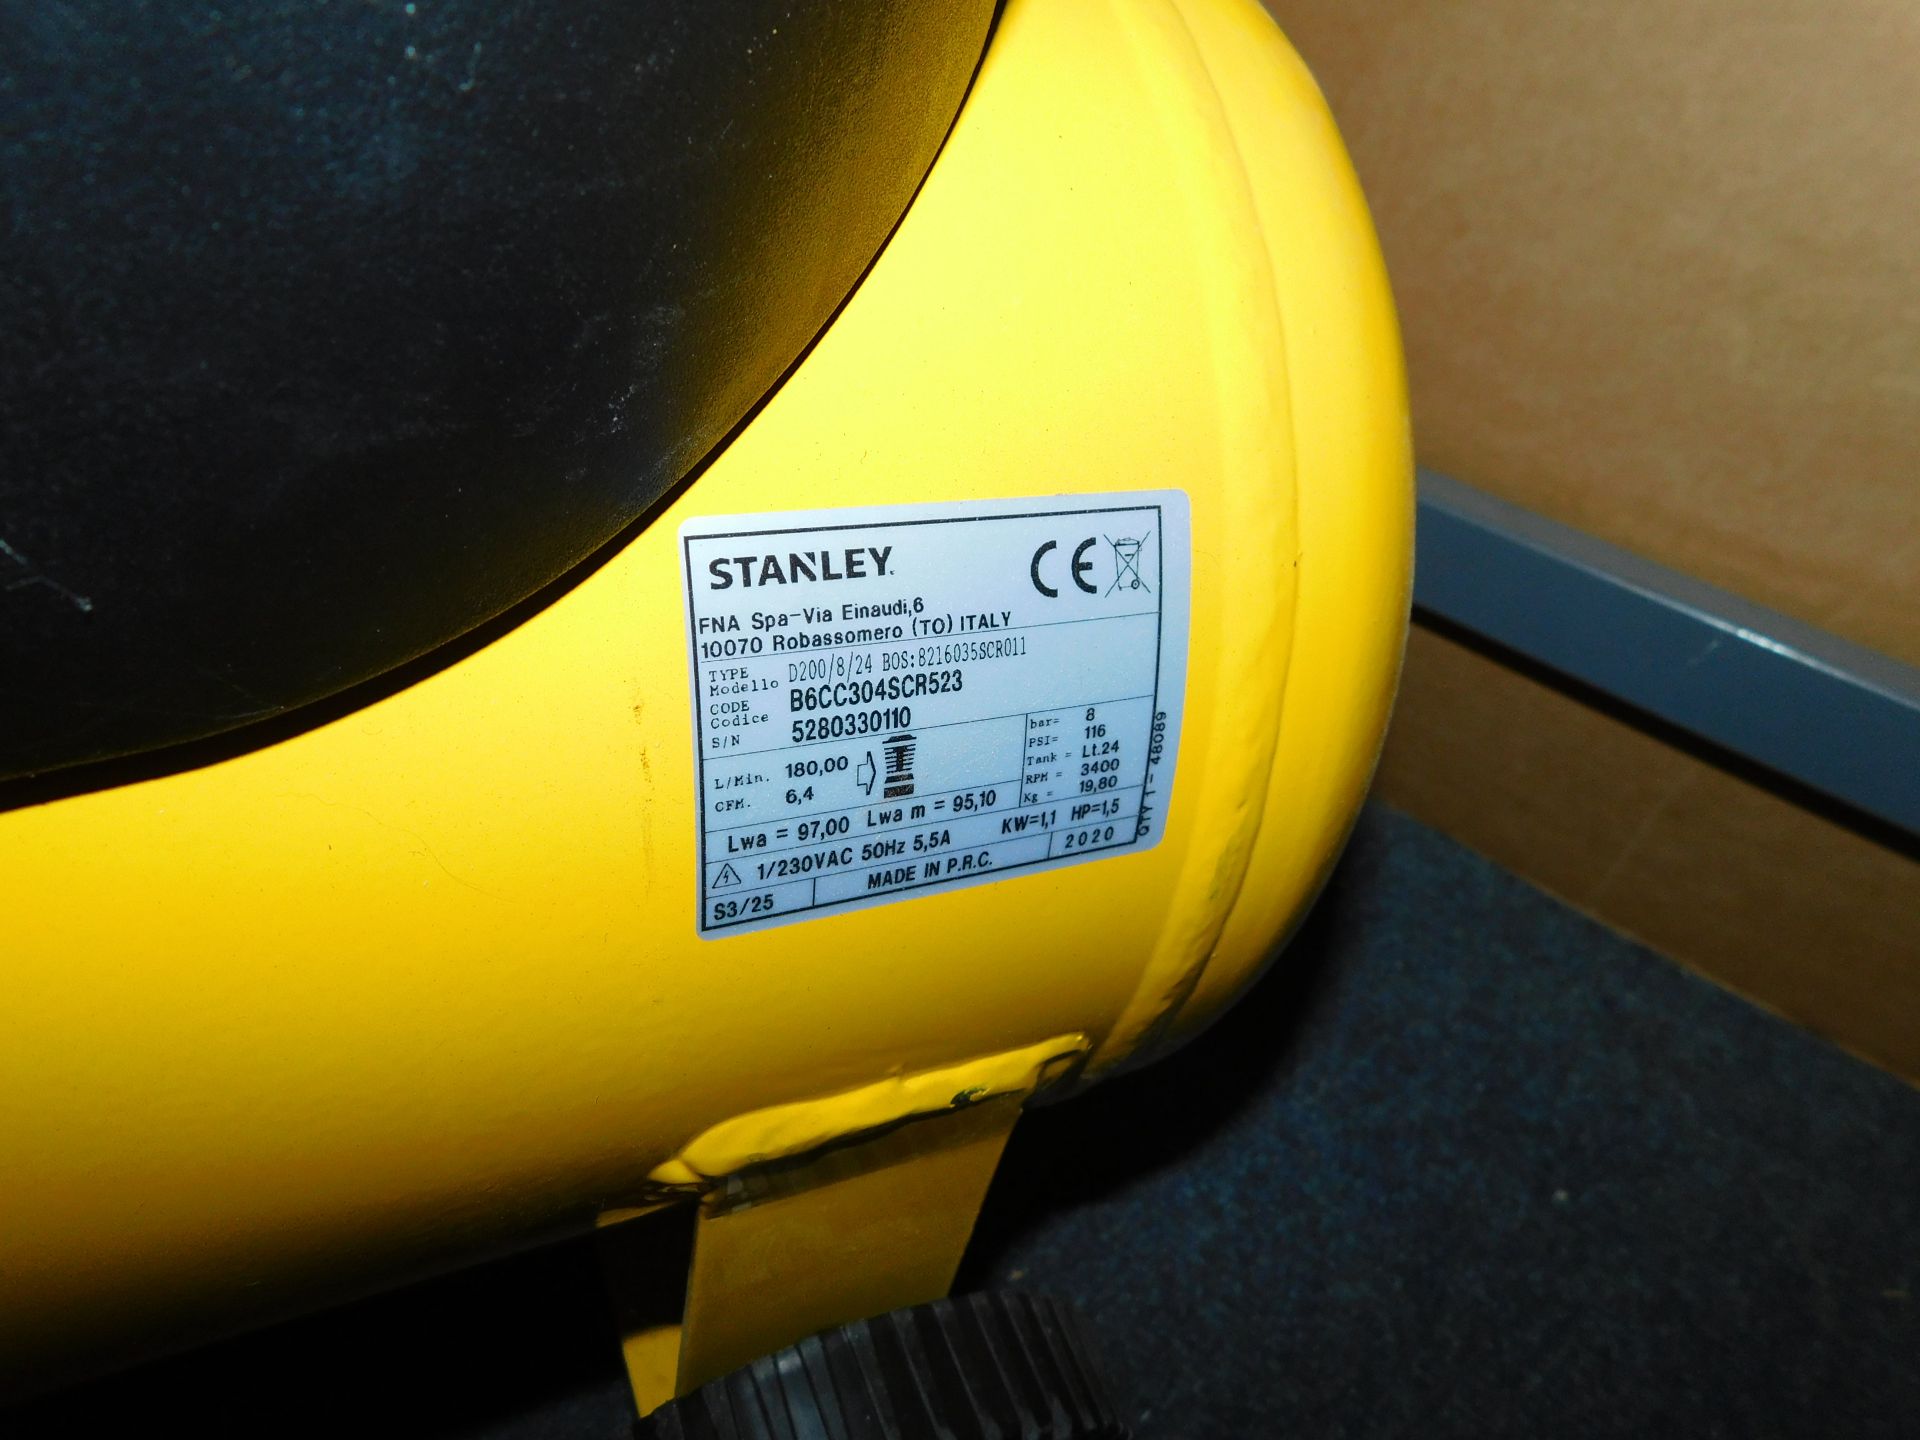 Stanley D200/8/24 Portable Compressor (Location Stockport. Please Refer to General Notes) - Image 2 of 3